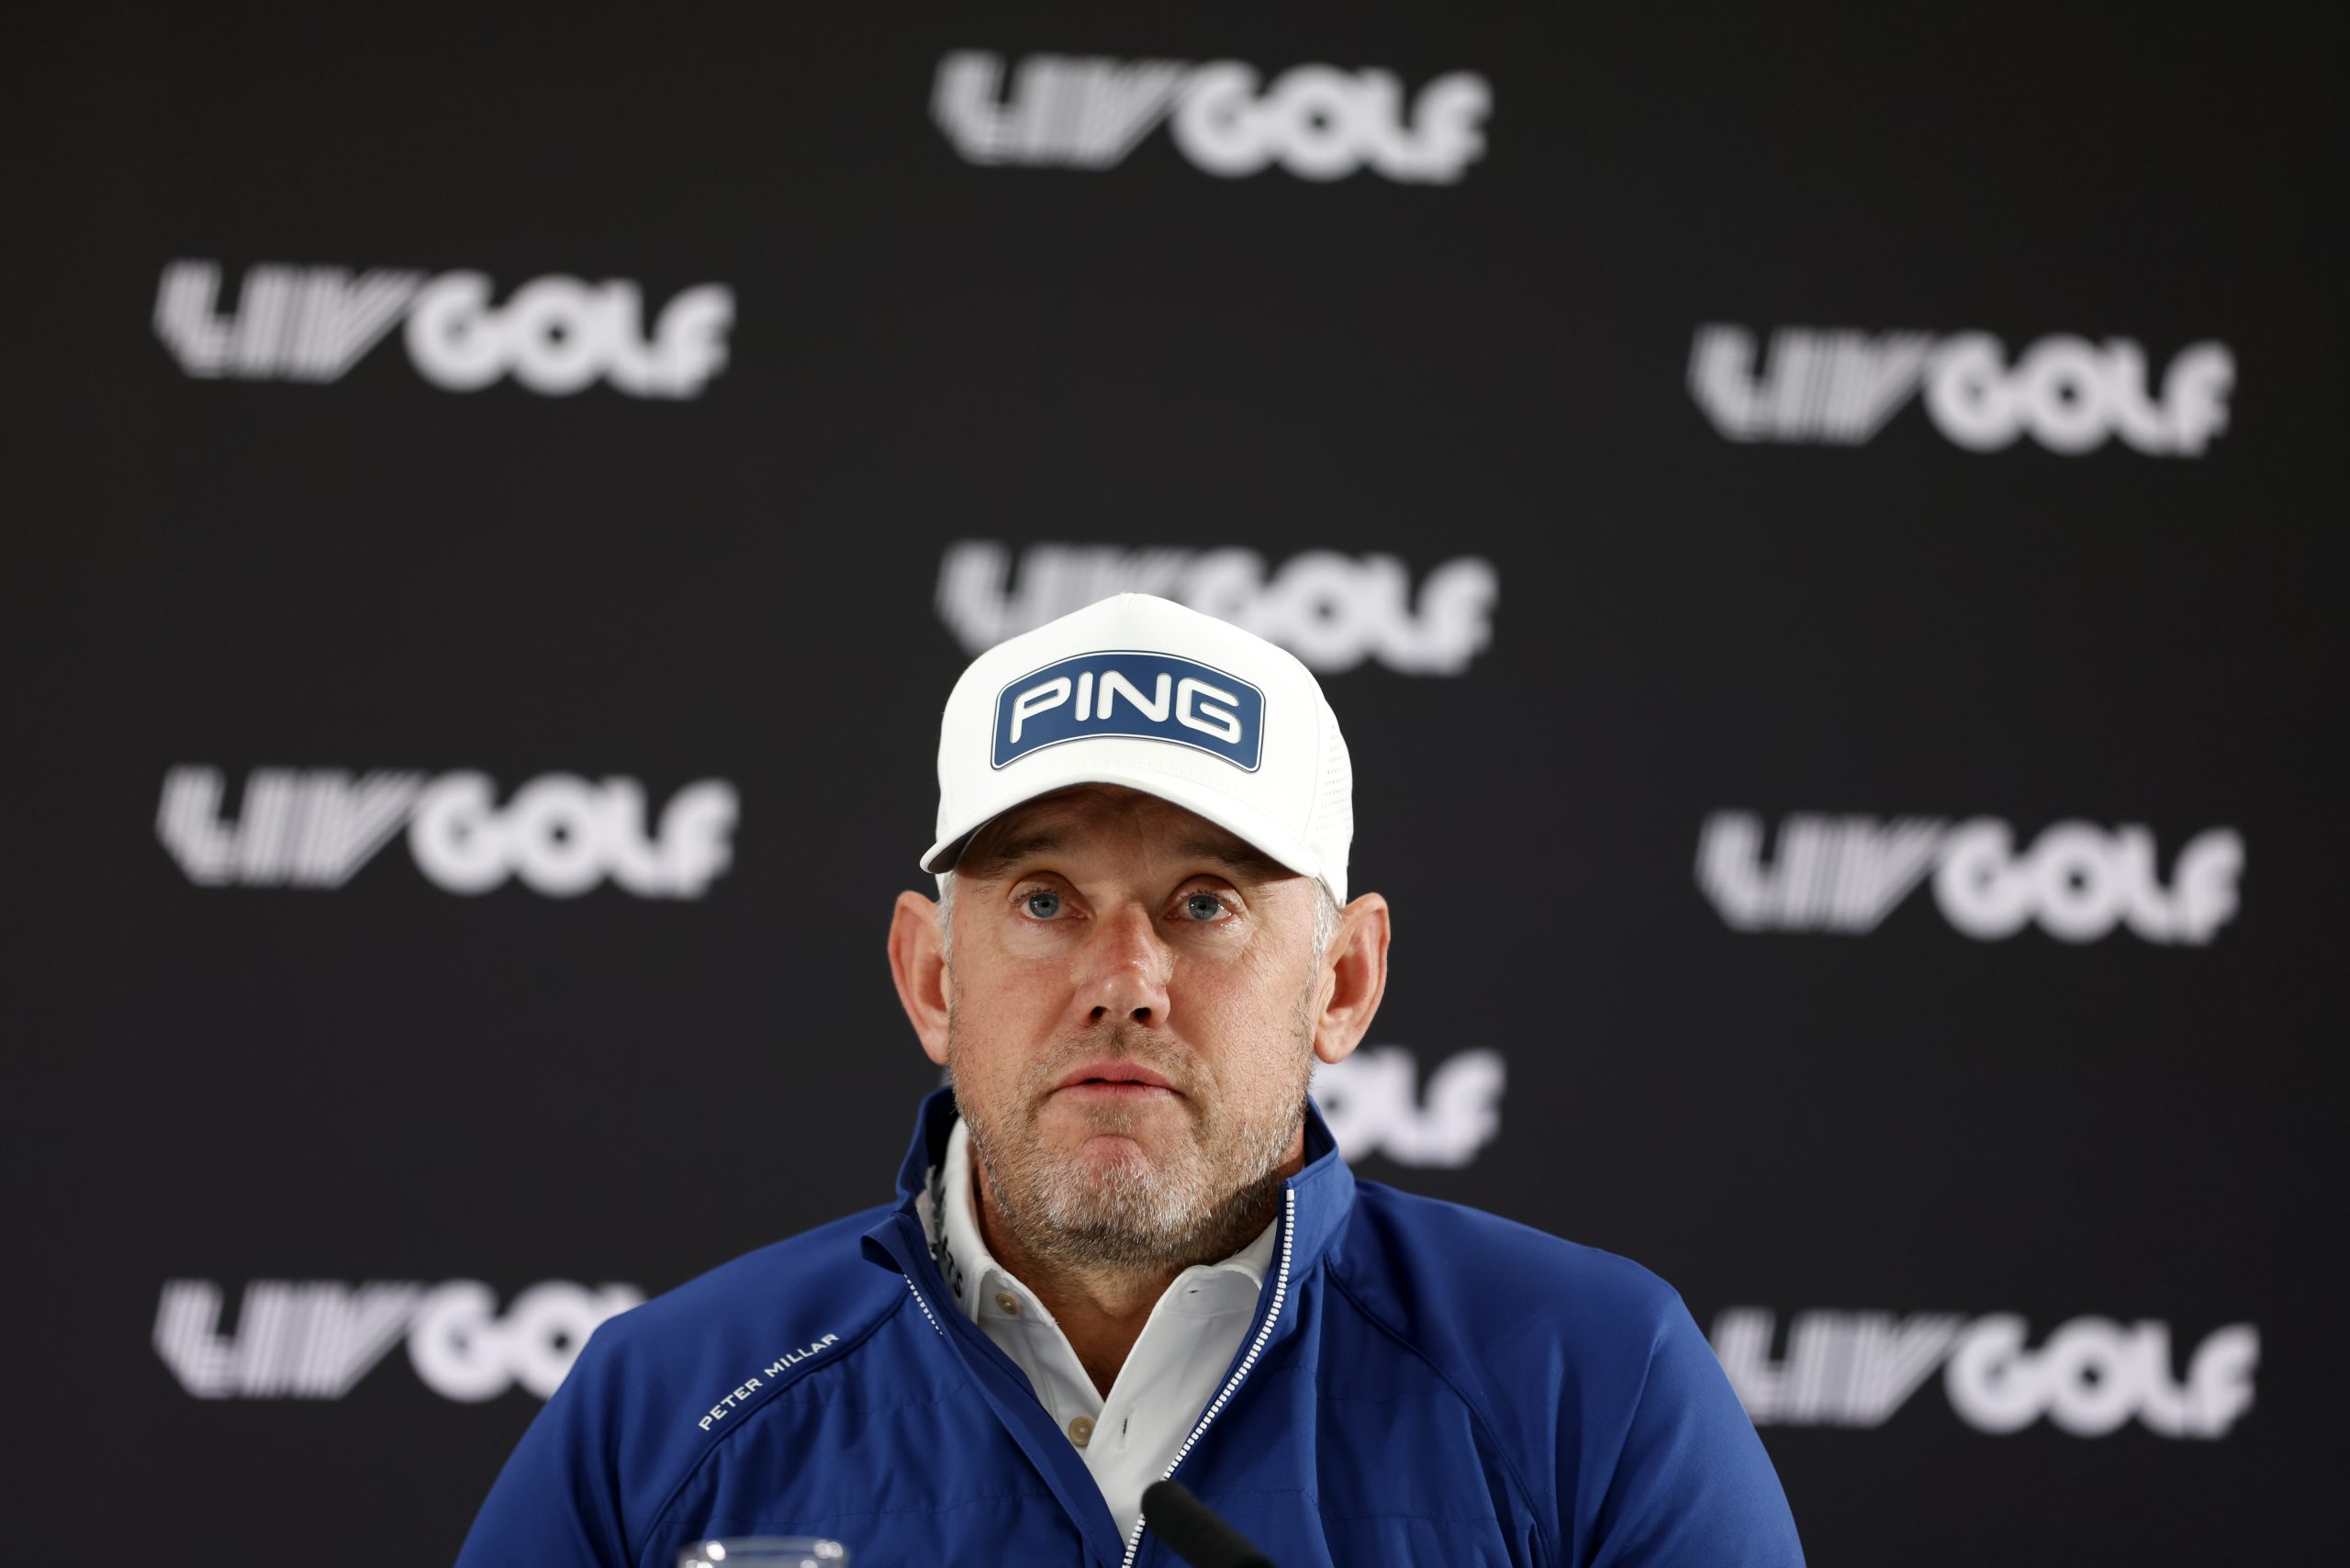 Lee Westwood accuses DP World Tour of being ‘fully in bed’ with PGA Tour